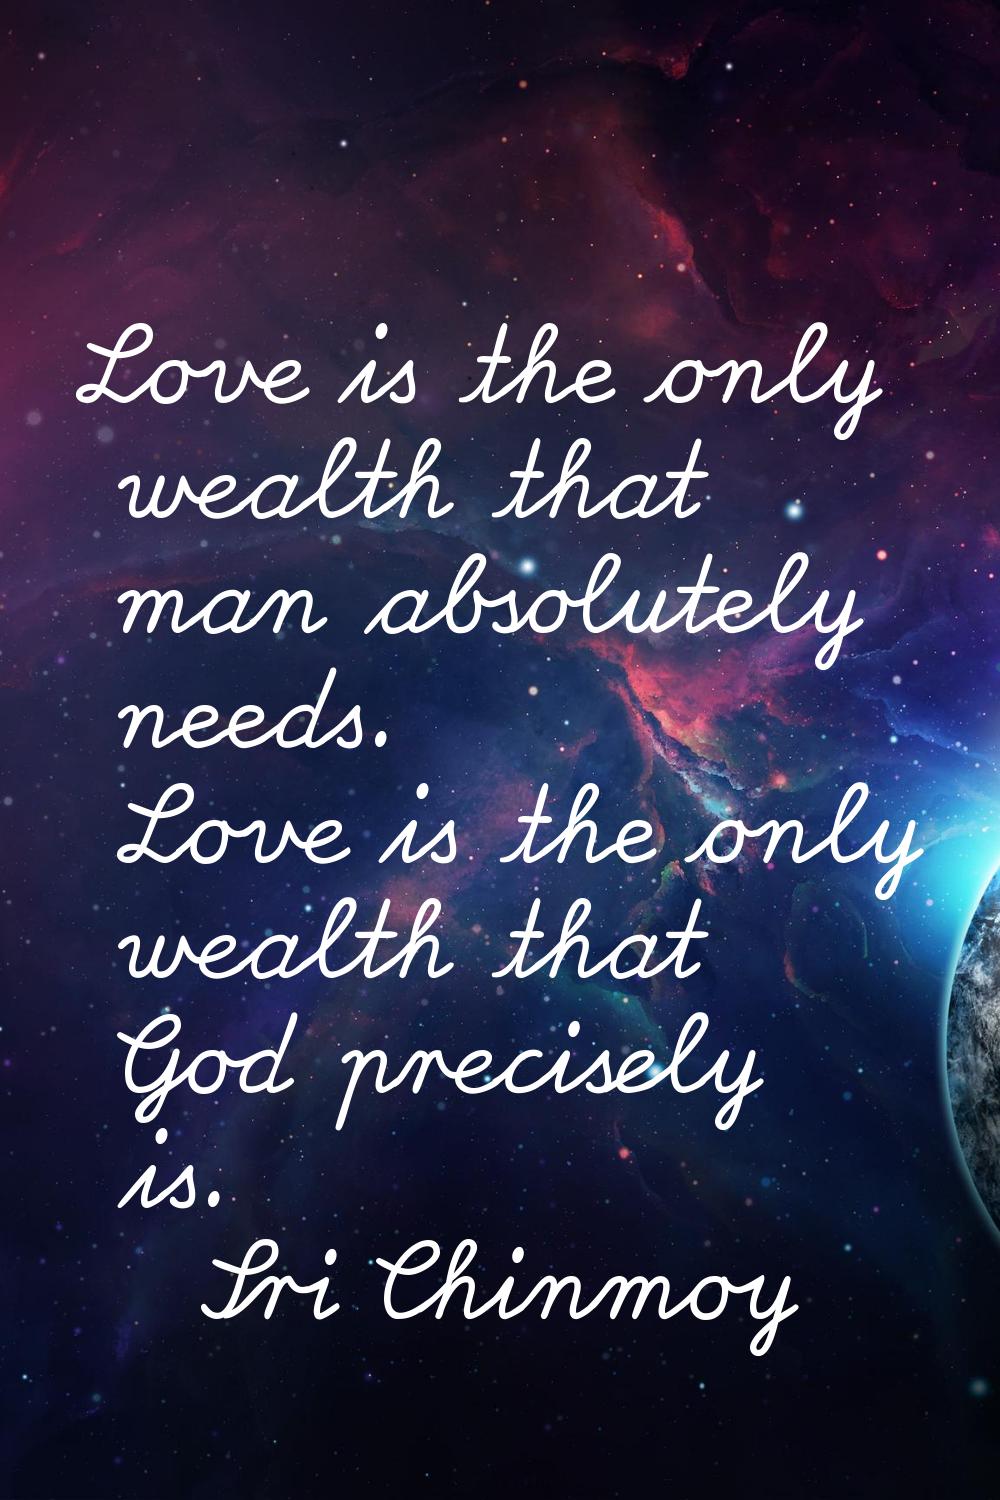 Love is the only wealth that man absolutely needs. Love is the only wealth that God precisely is.